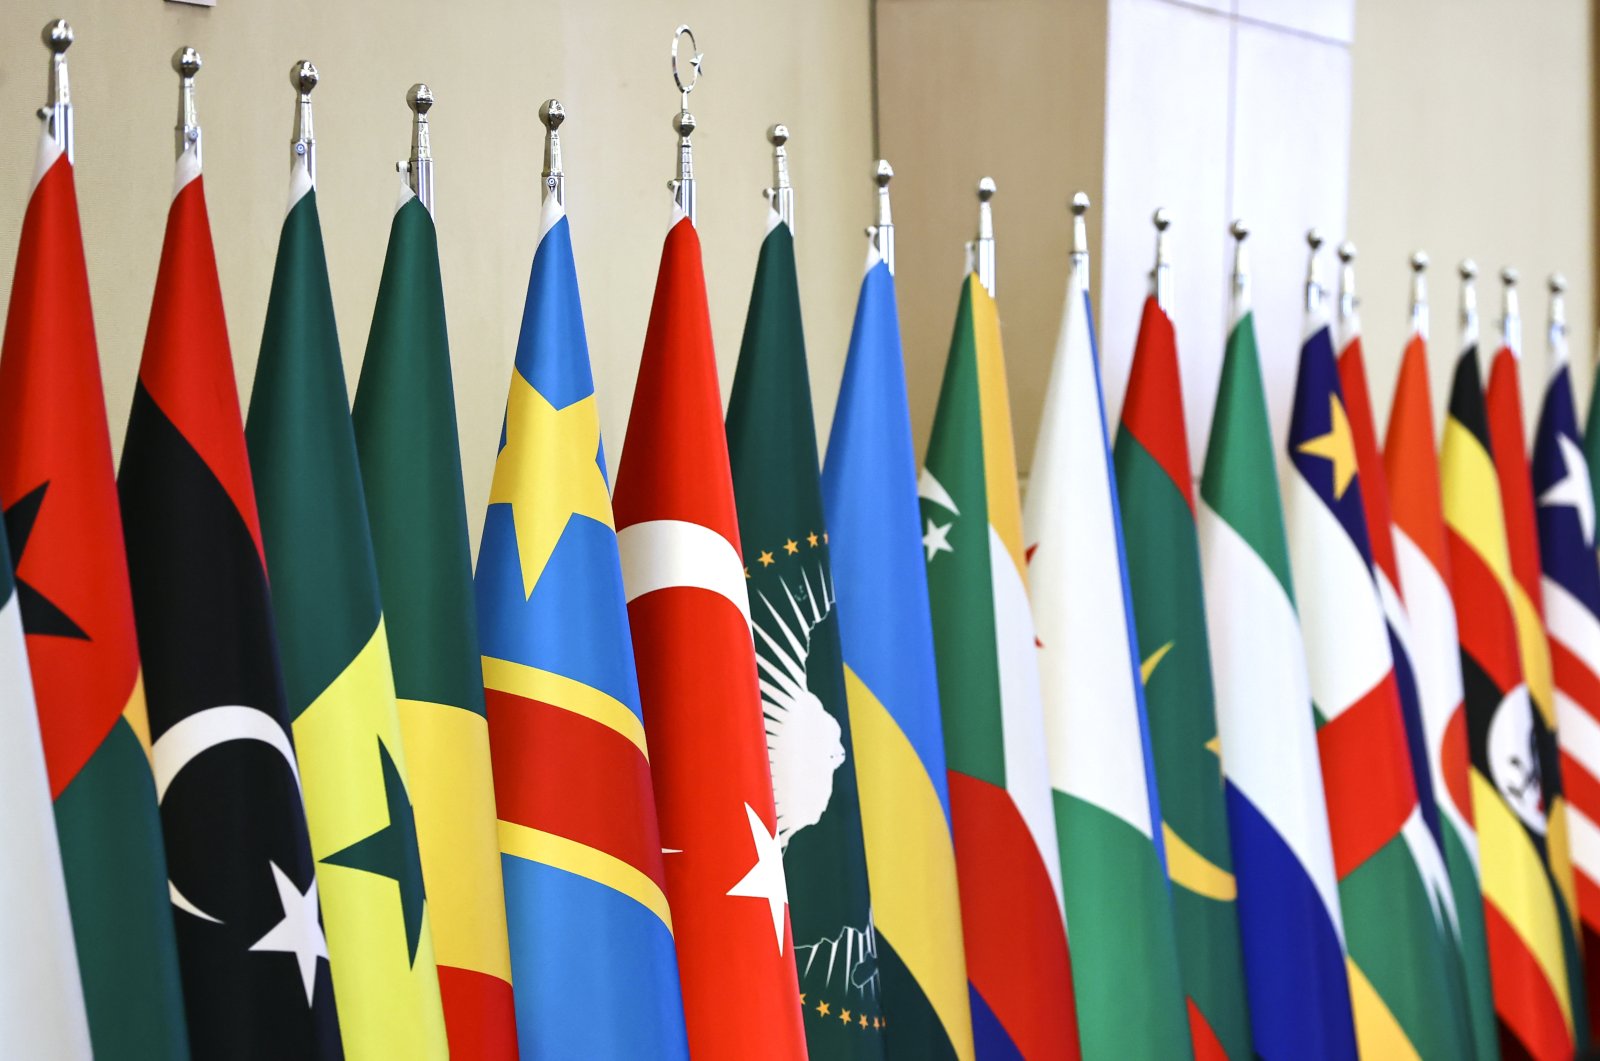 Flags of participants of the 3rd Turkey-Africa Partnership Summit in Istanbul, Turkey, Friday, Dec. 17, 2021. (AA Photo)